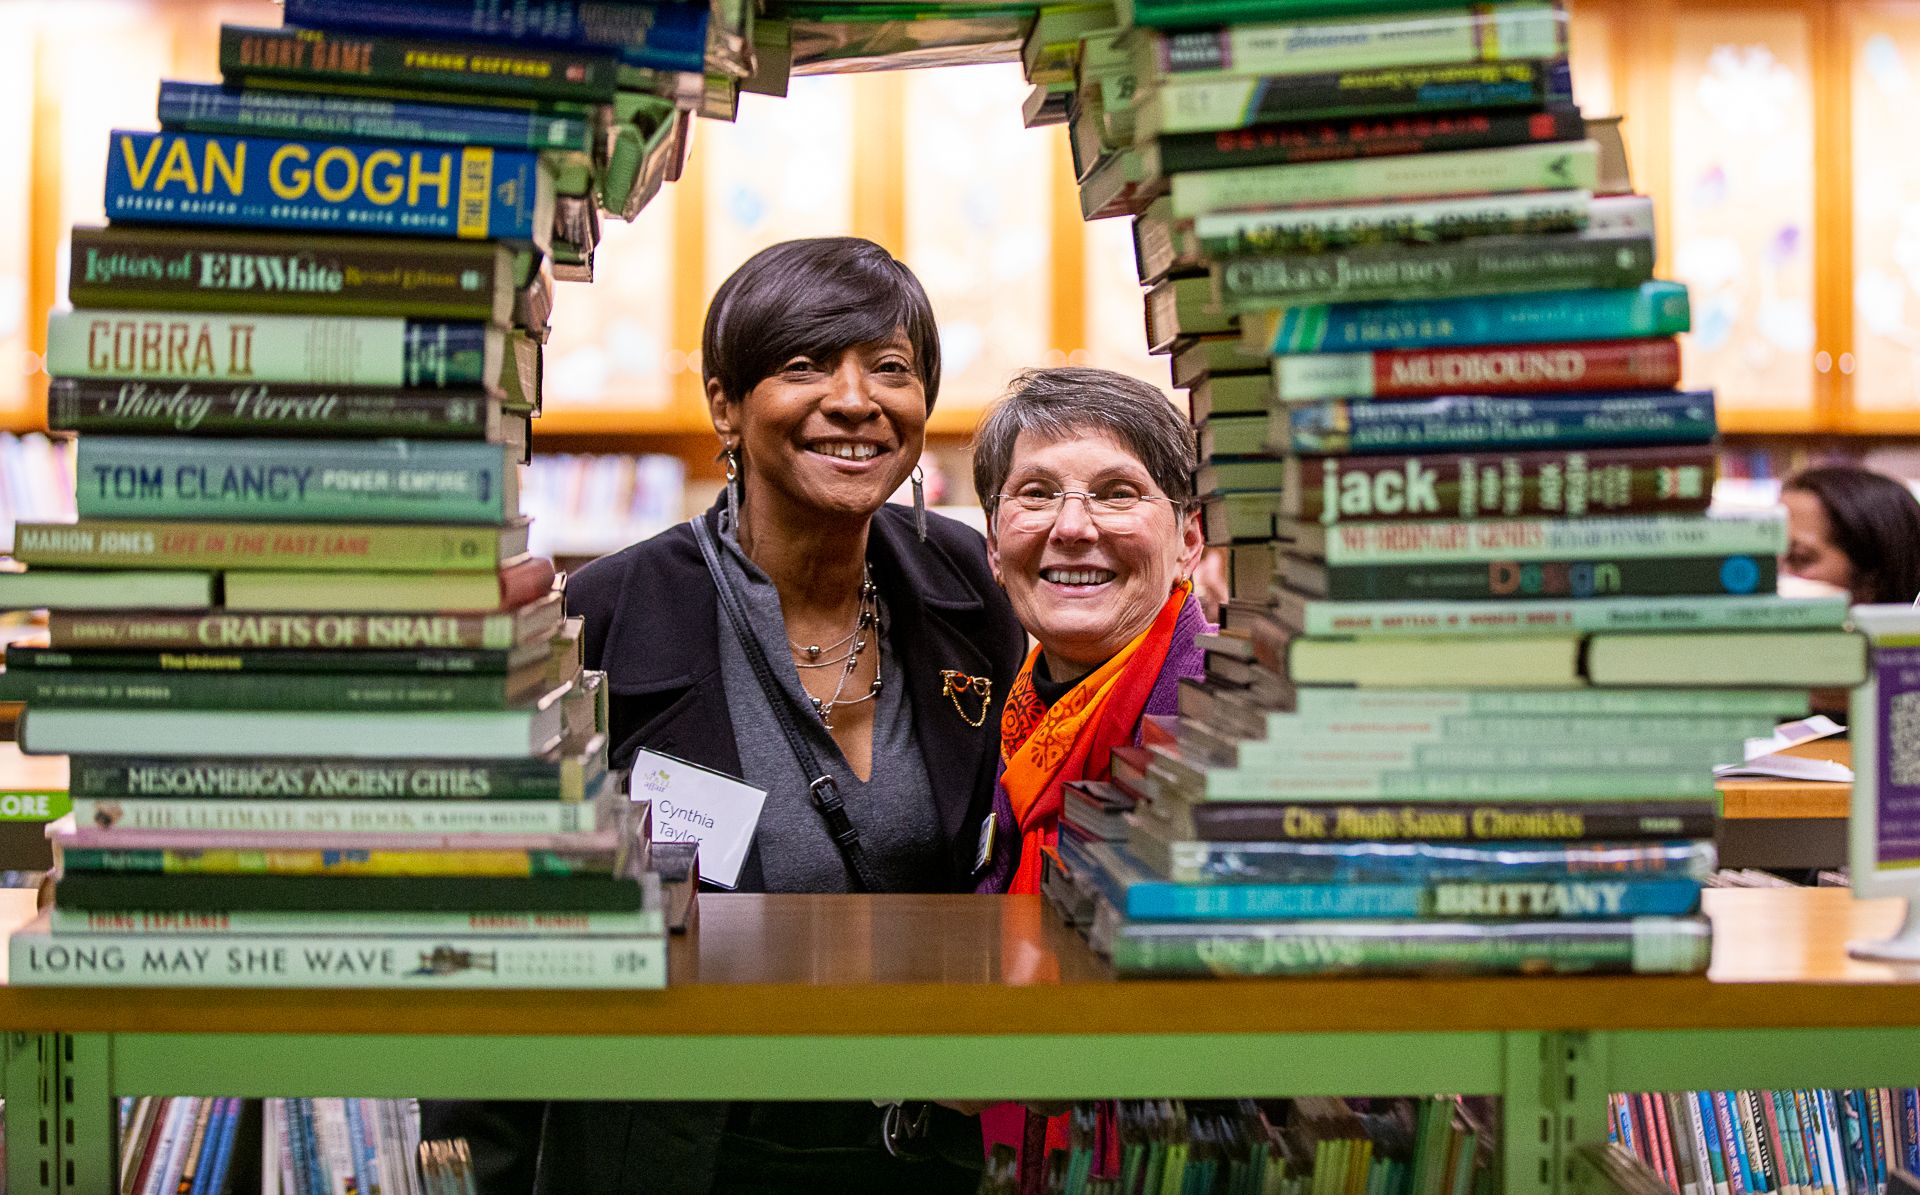 Cynthia Taylor and Cathy Ernst book arch